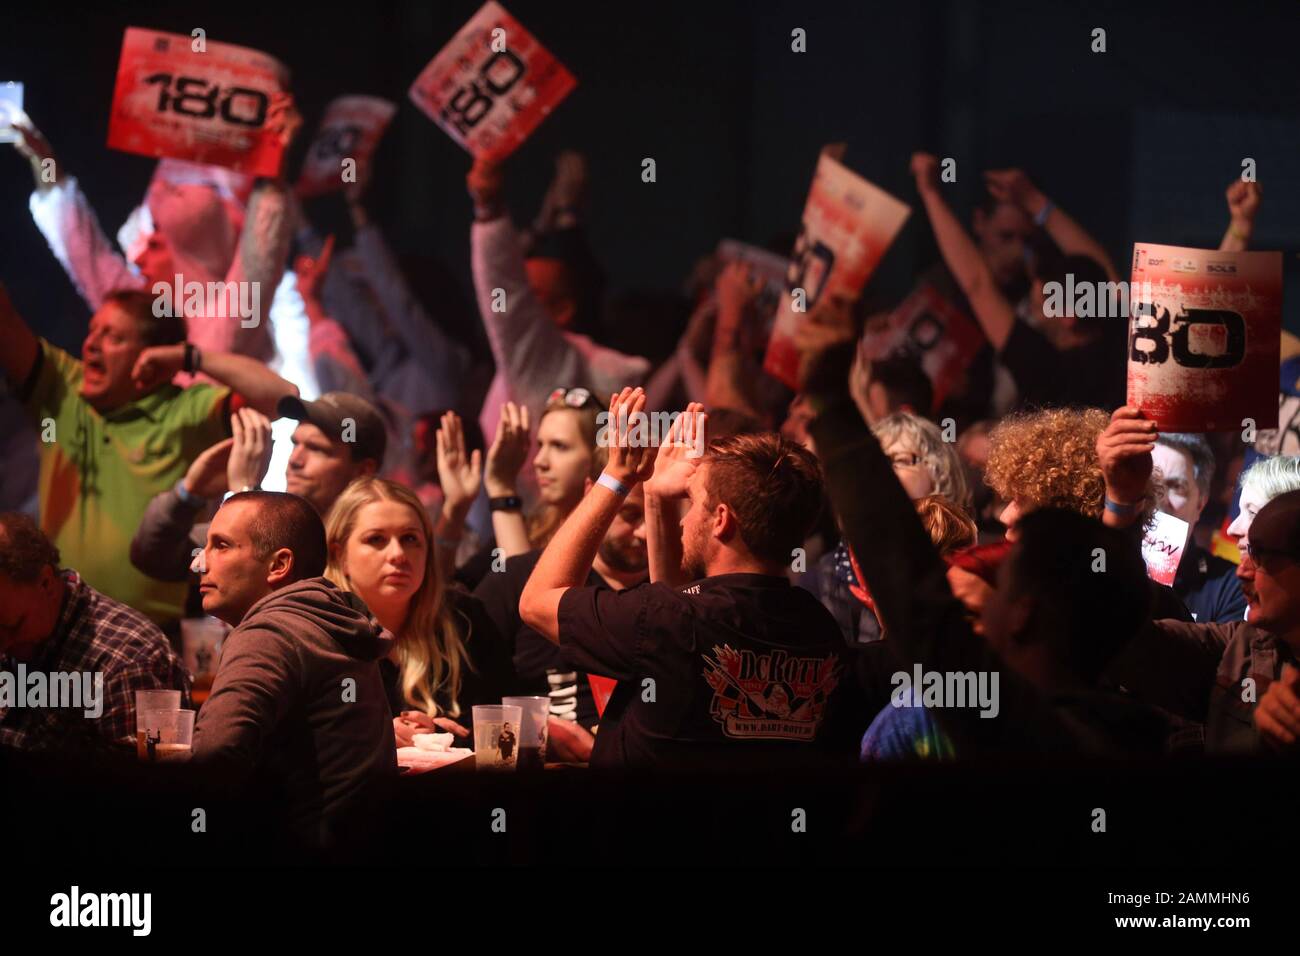 Fans at the German Darts Grand Prix at the Zenith in Munich. Cardboard signs with the magic score of 180 are held up. [automated translation] Stock Photo